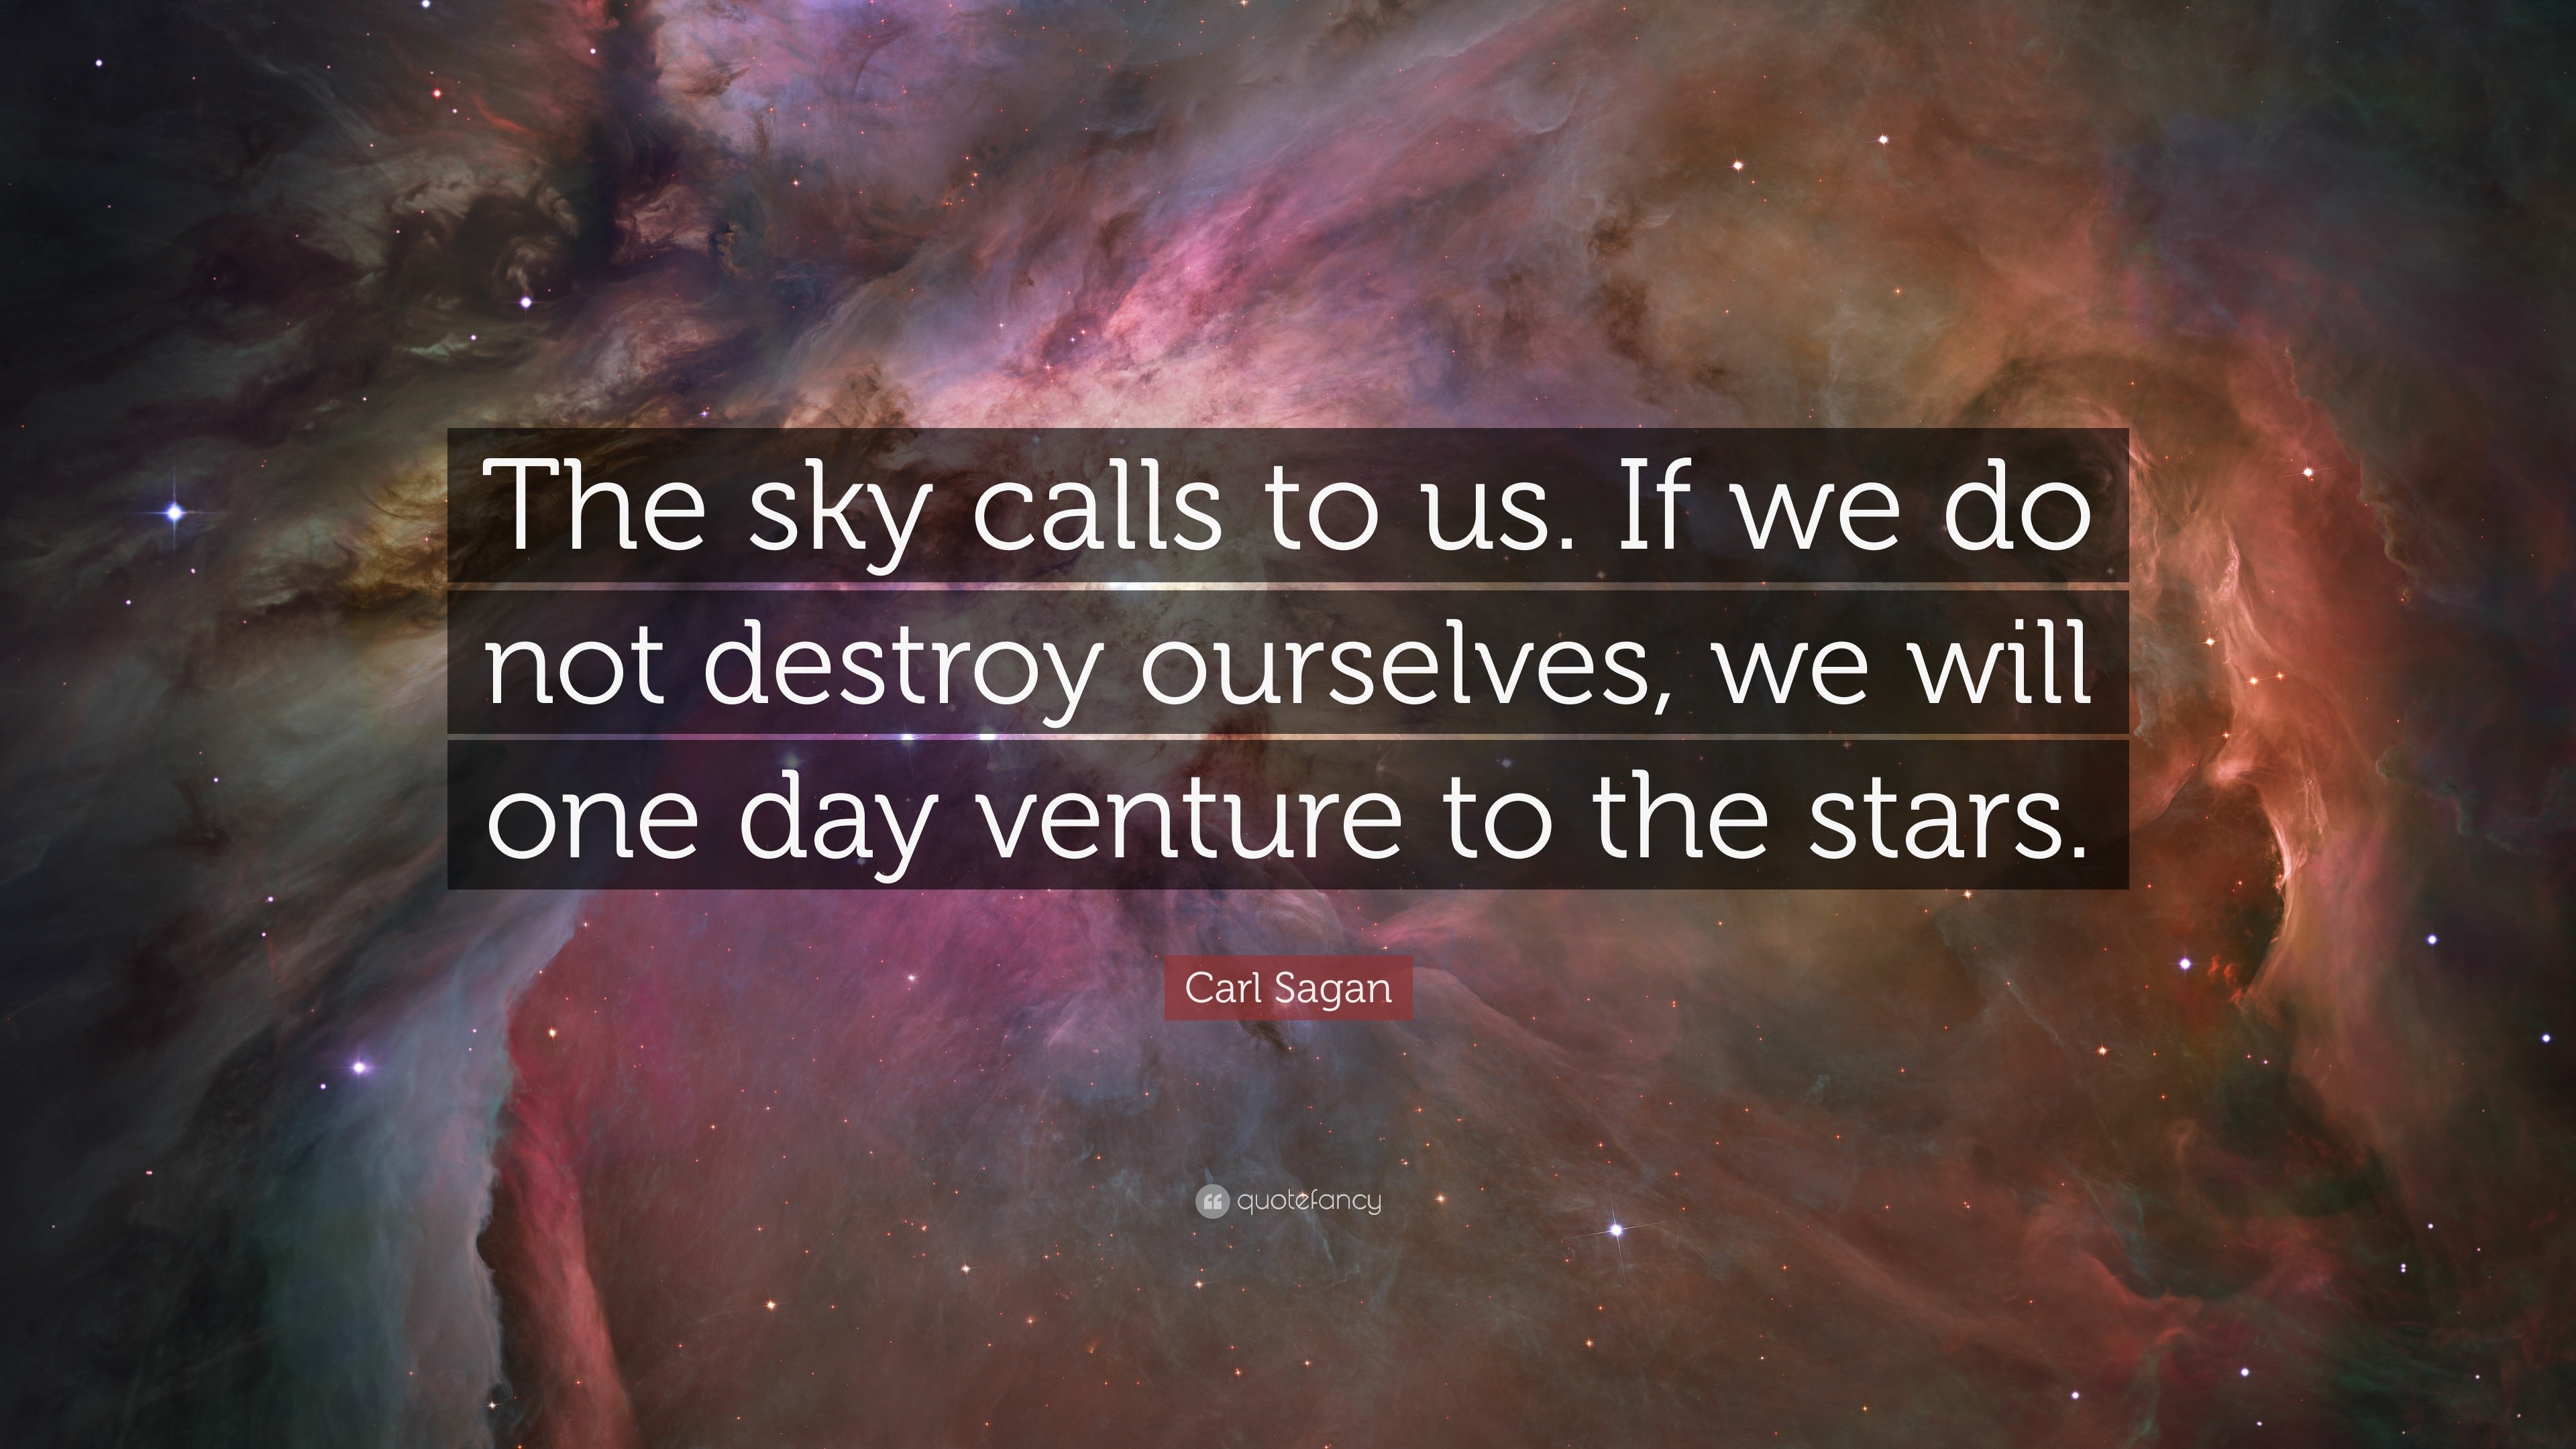 Carl Sagan Quotes About Space